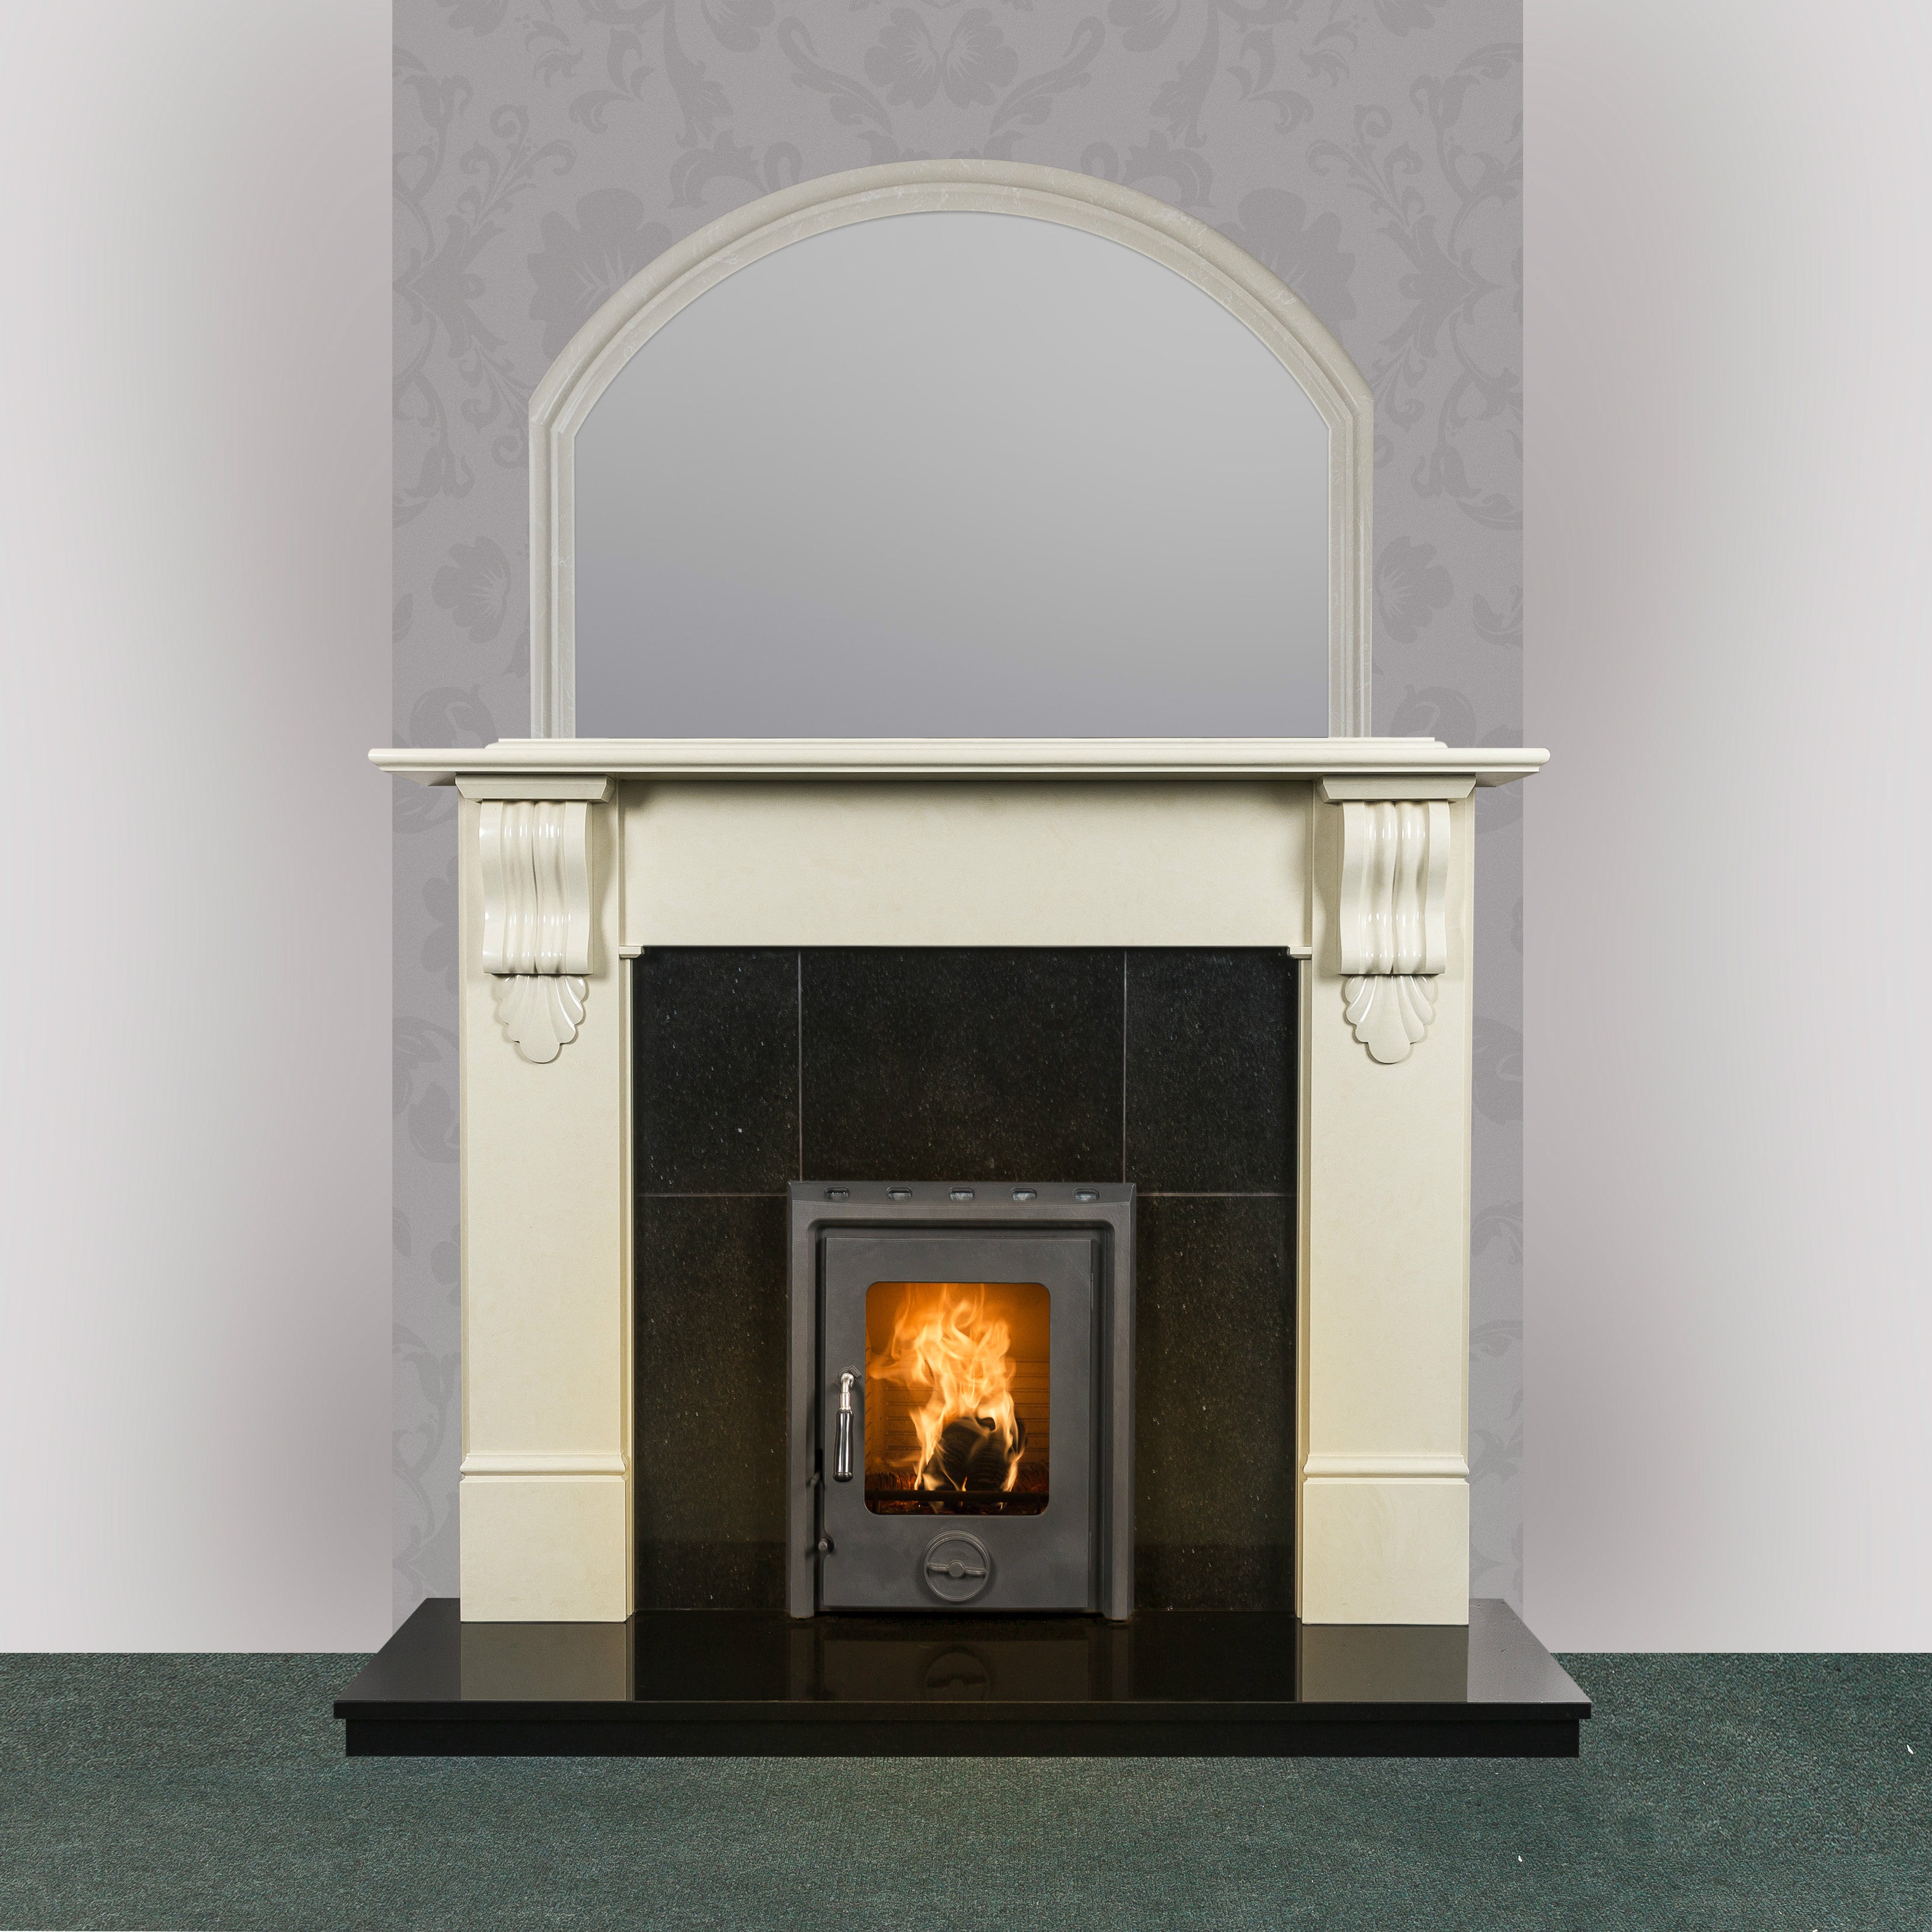 Image of Victoria Marble Fireplace in Ivory Pearl finish with Kate Insert stove in matt black